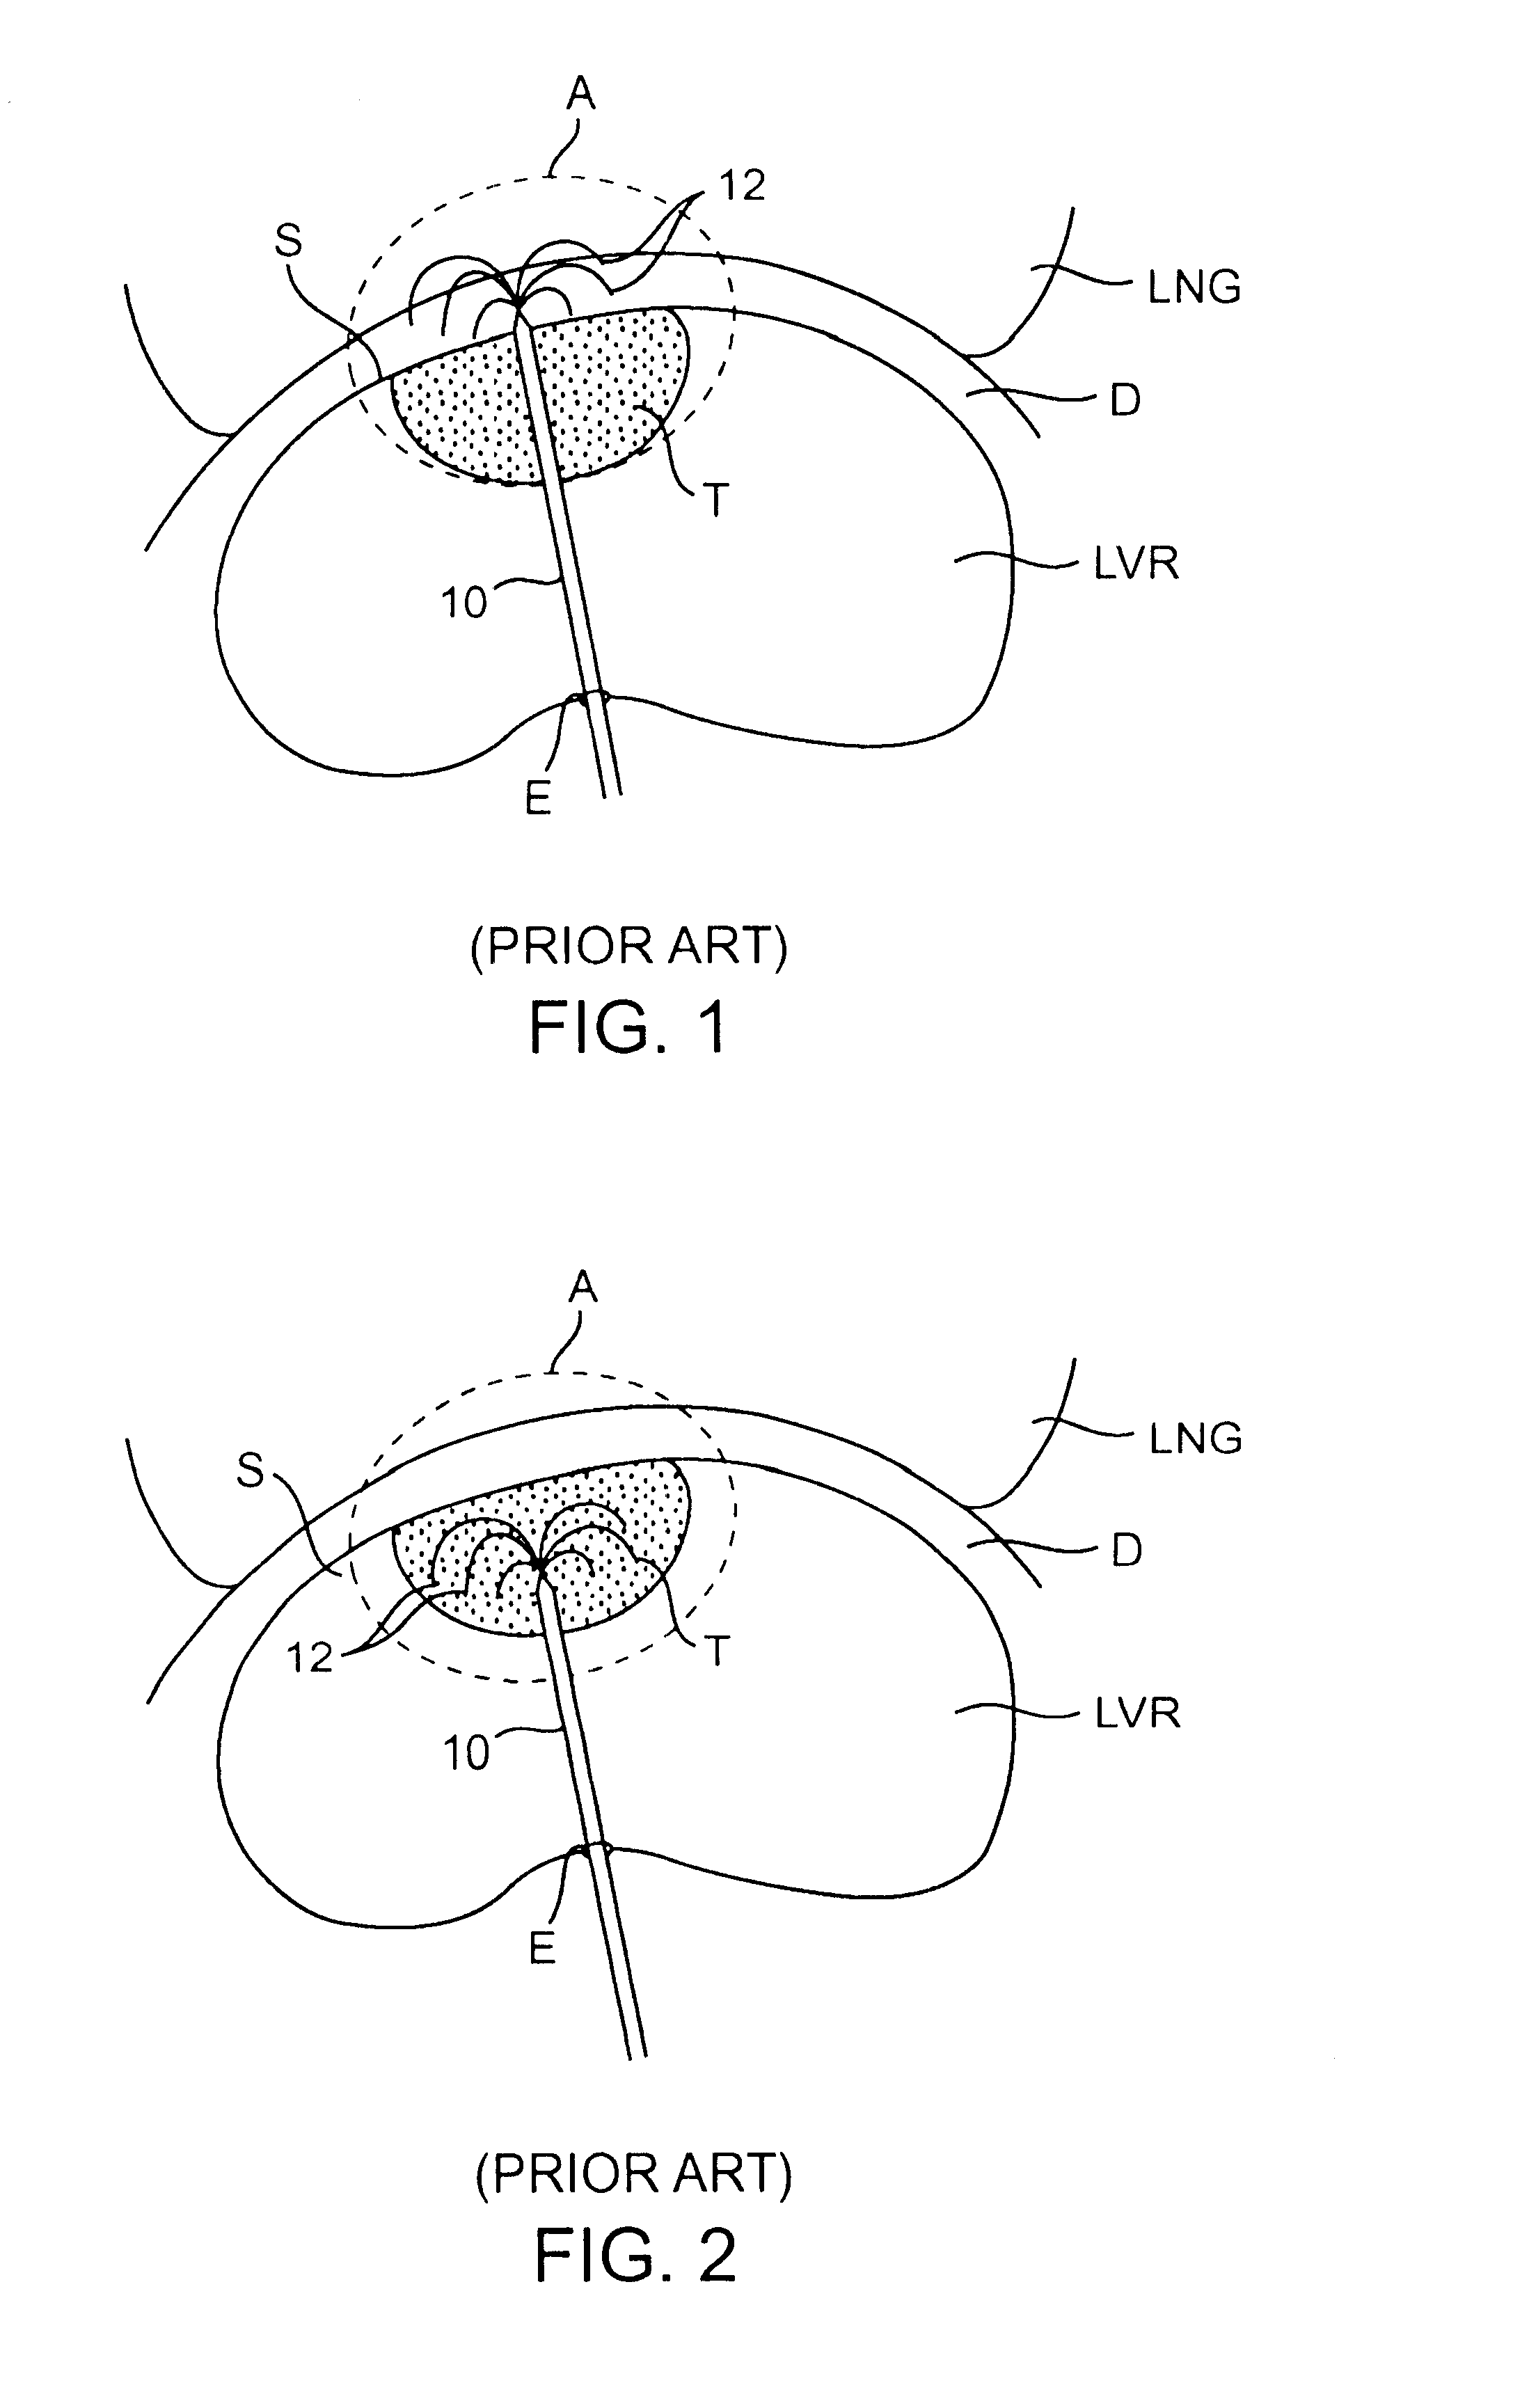 Apparatus and method for shielding tissue during tumor ablation